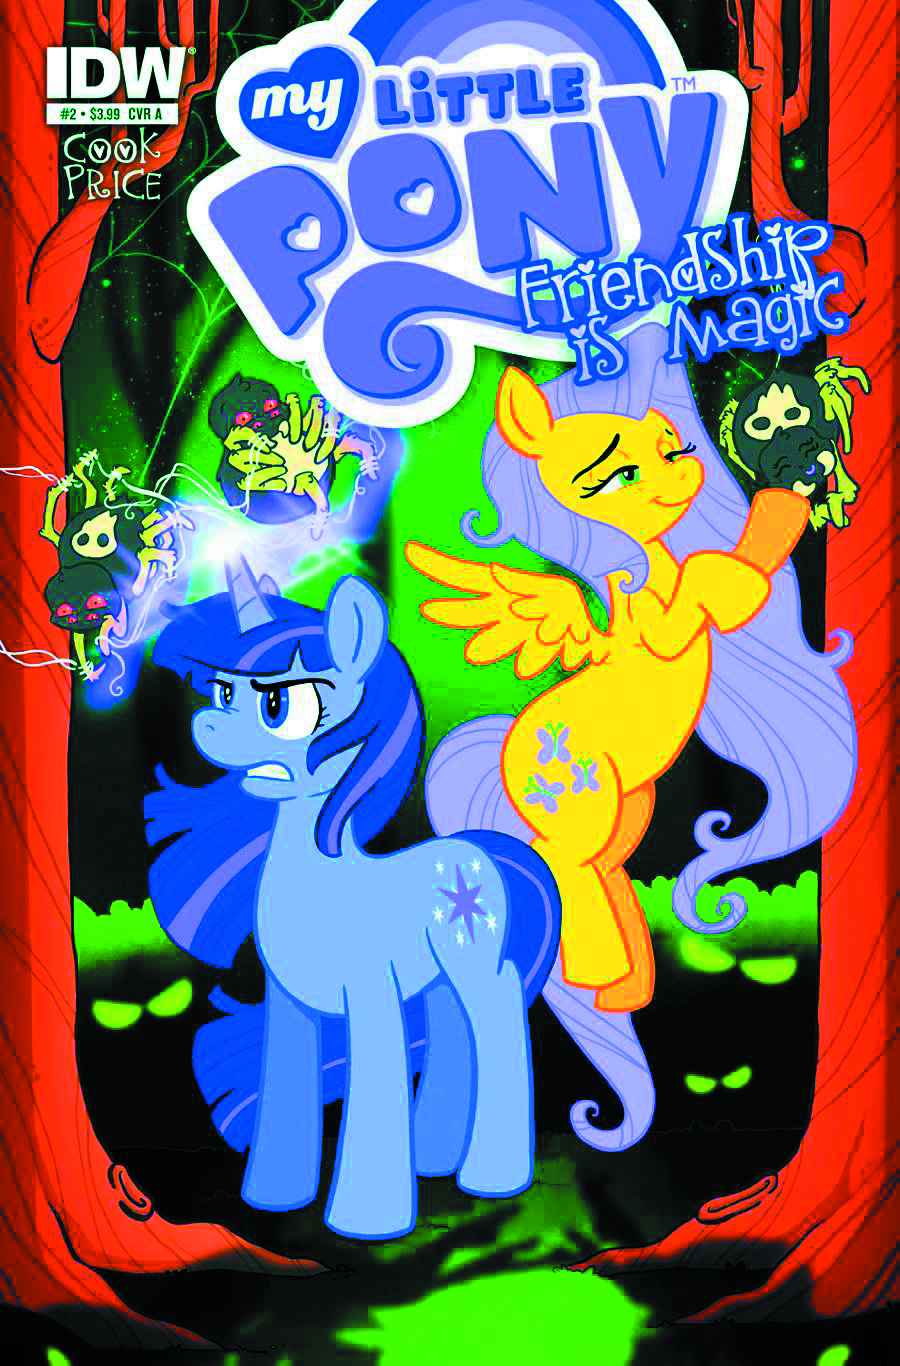 MY LITTLE PONY FRIENDSHIP IS MAGIC #2 4TH PTG (PP #1072)